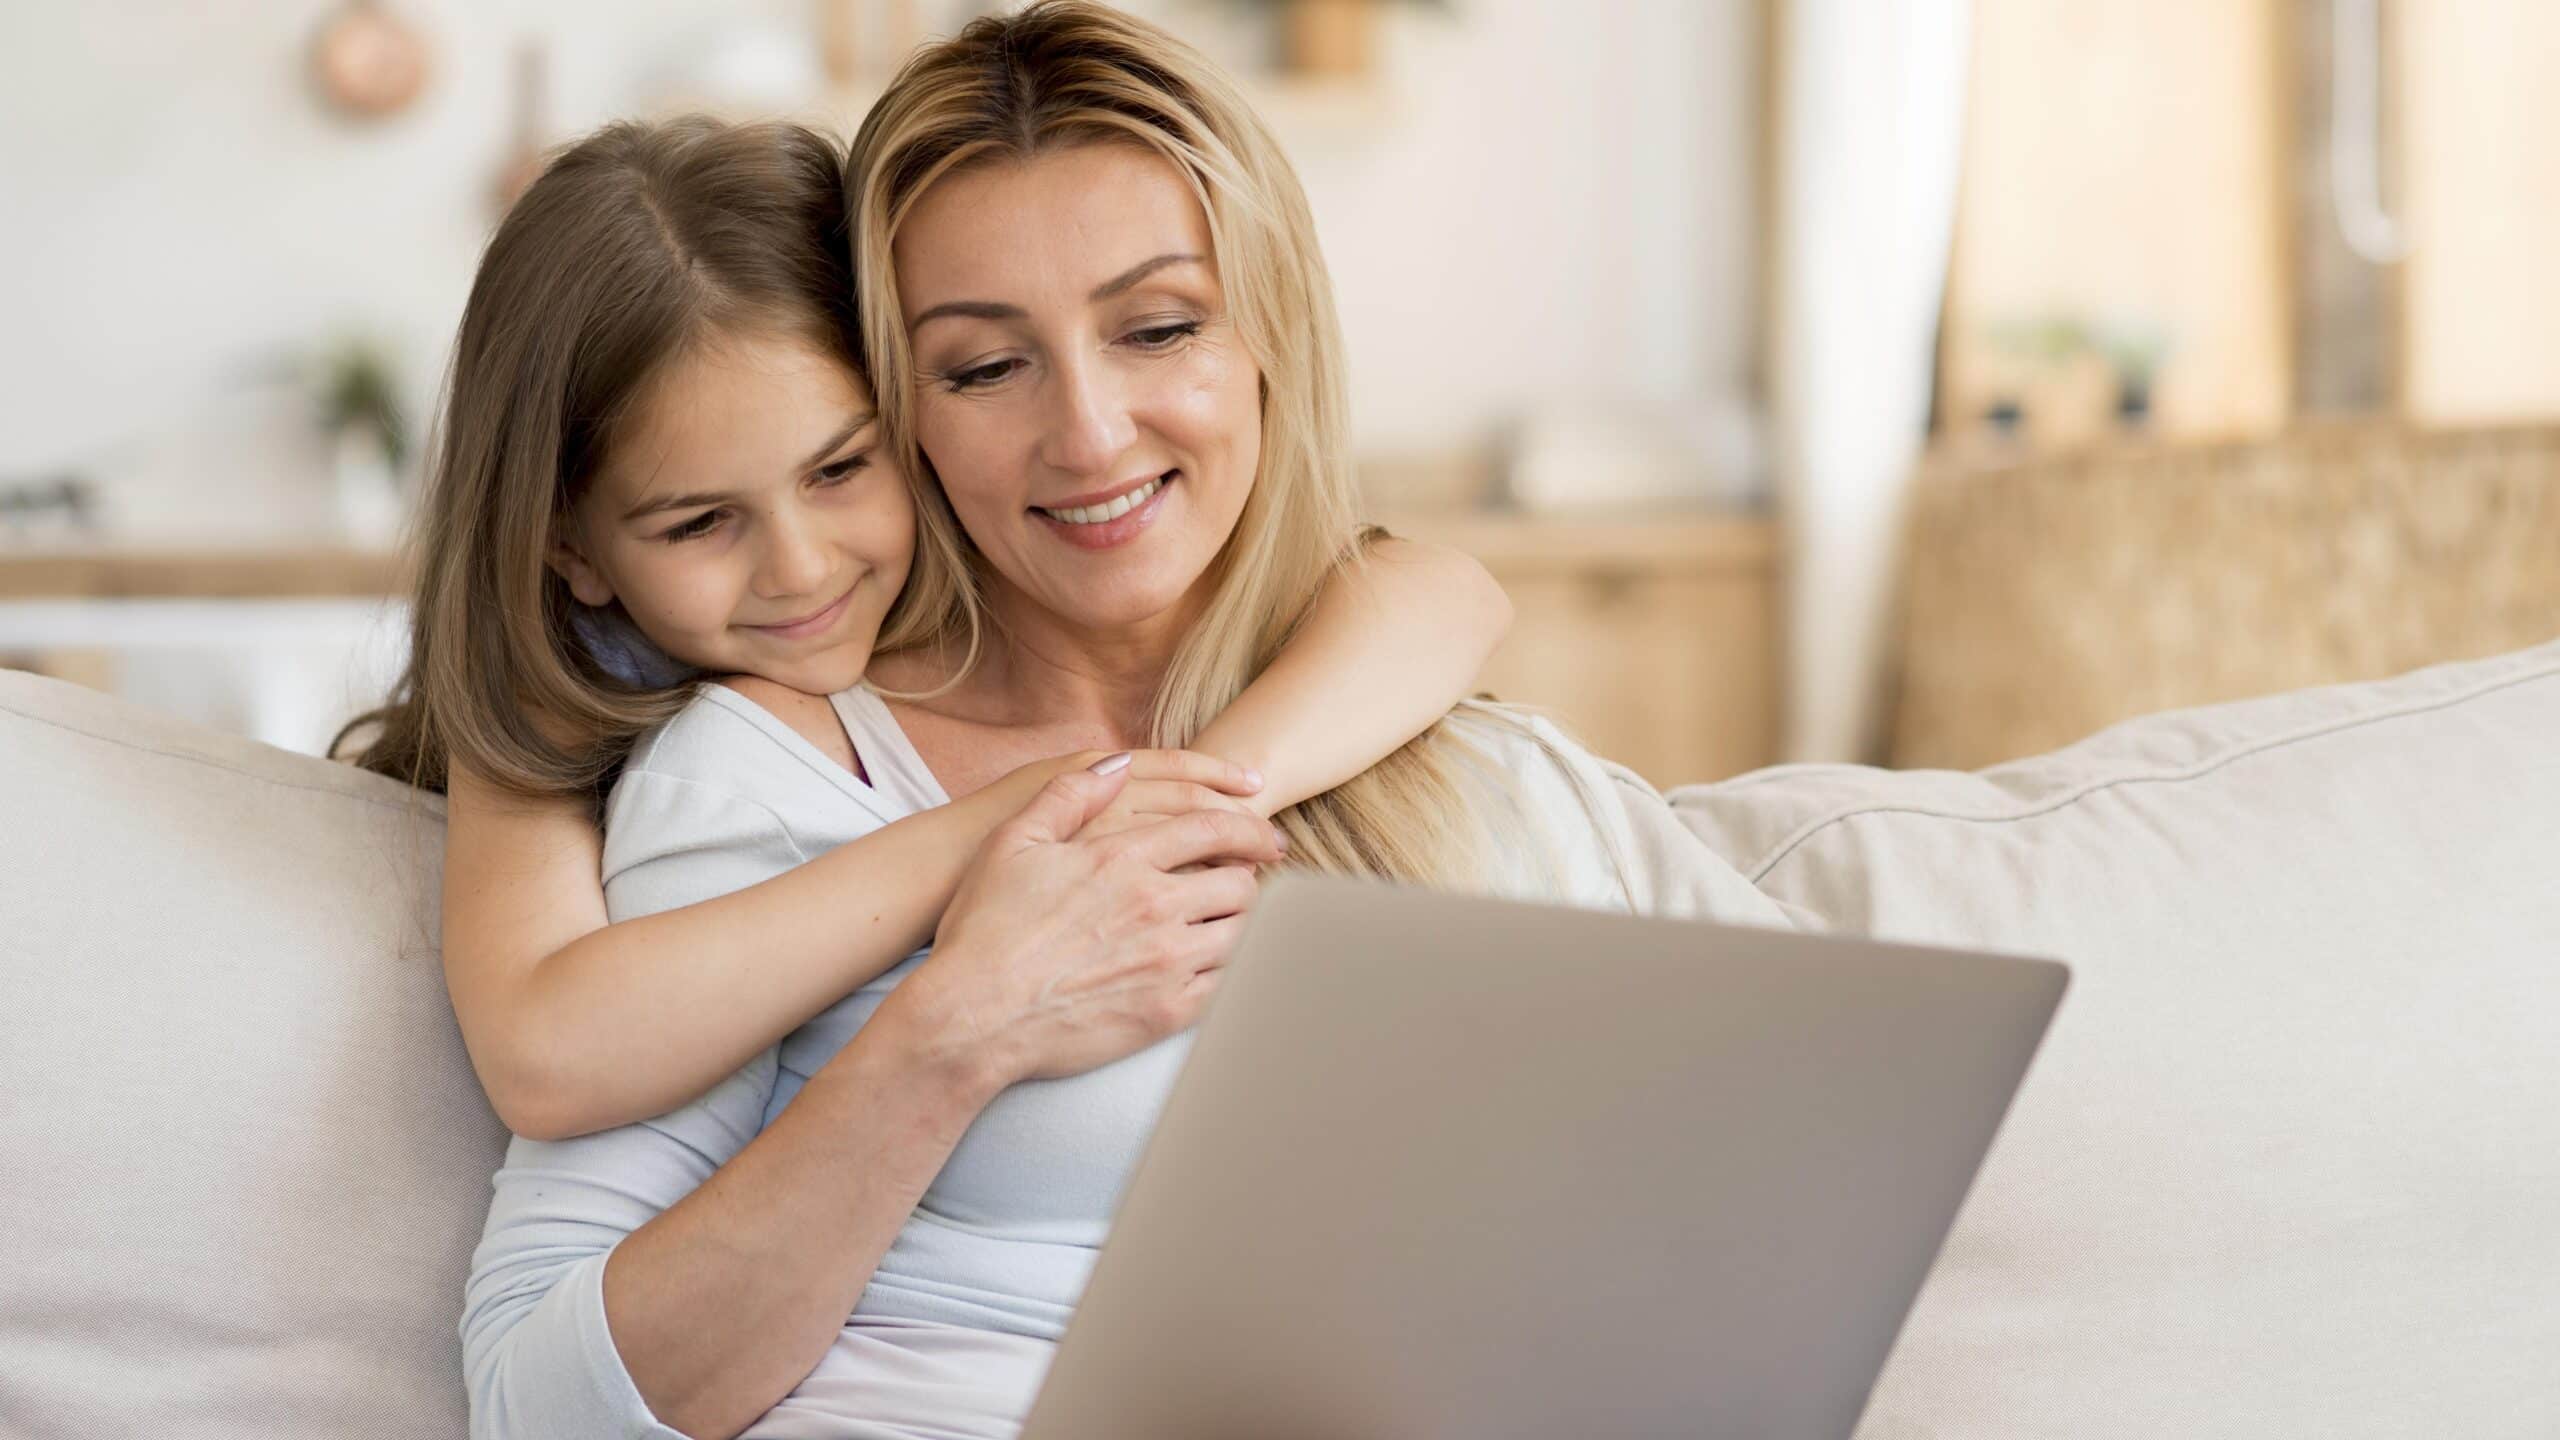 8 Best Jobs for Moms with no degree. High Paying